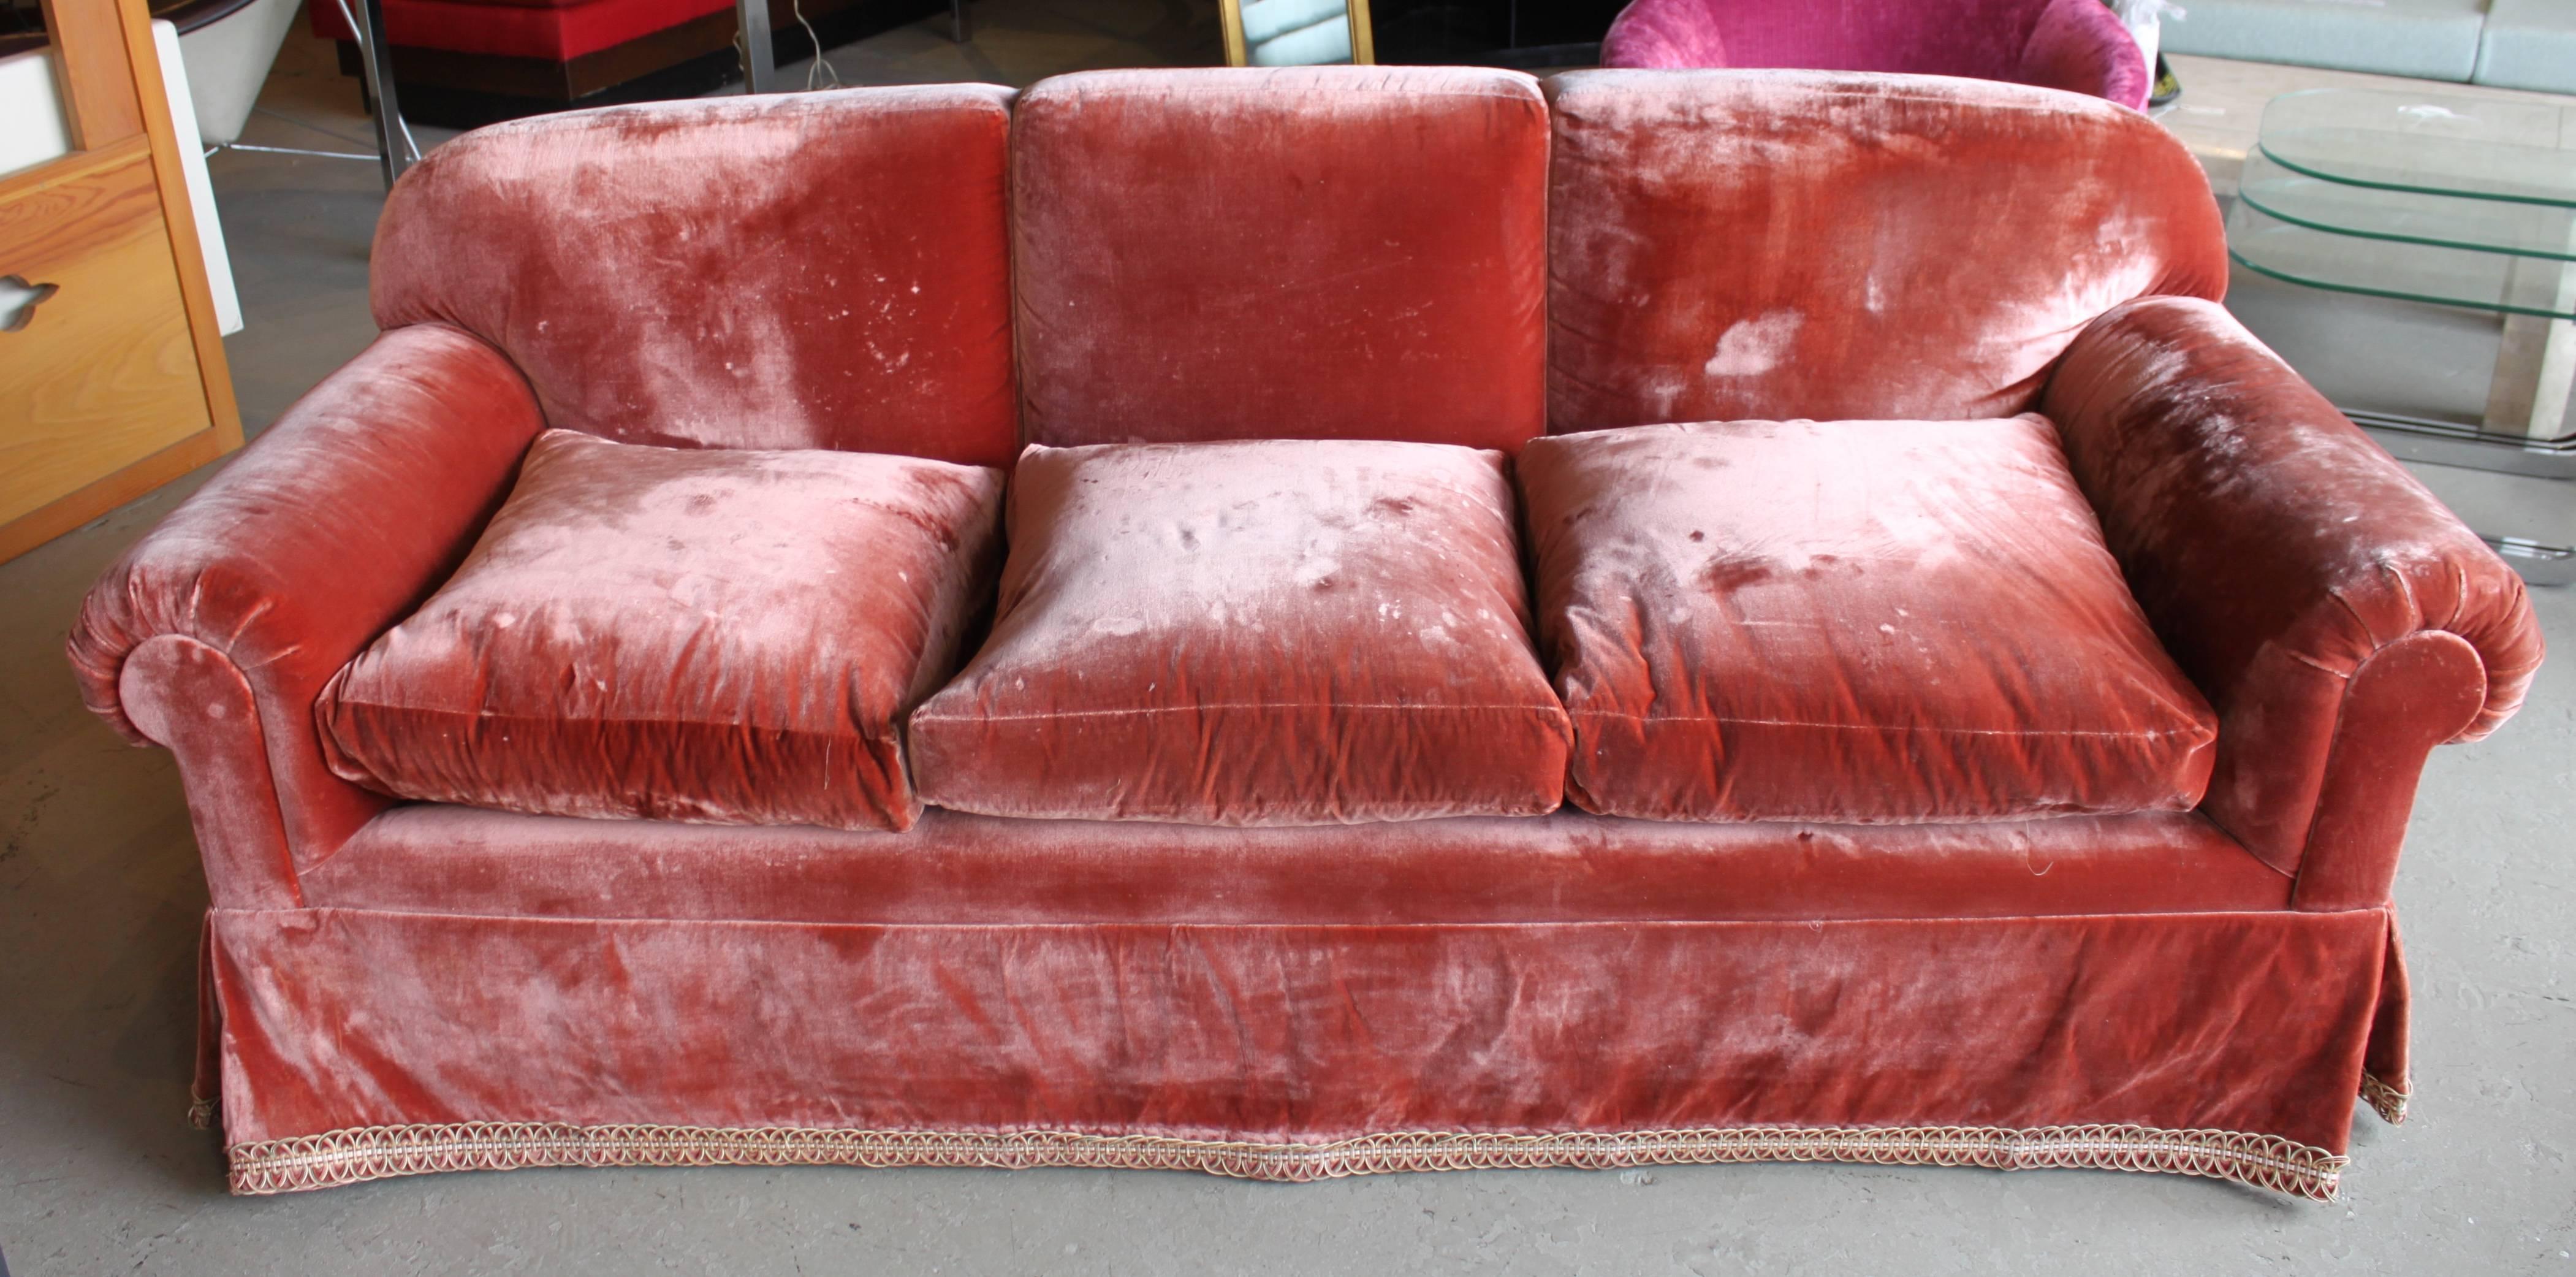 Classical timeless design high quality sofa in silk velvet. Down feather cushions. Heavy and sturdy.